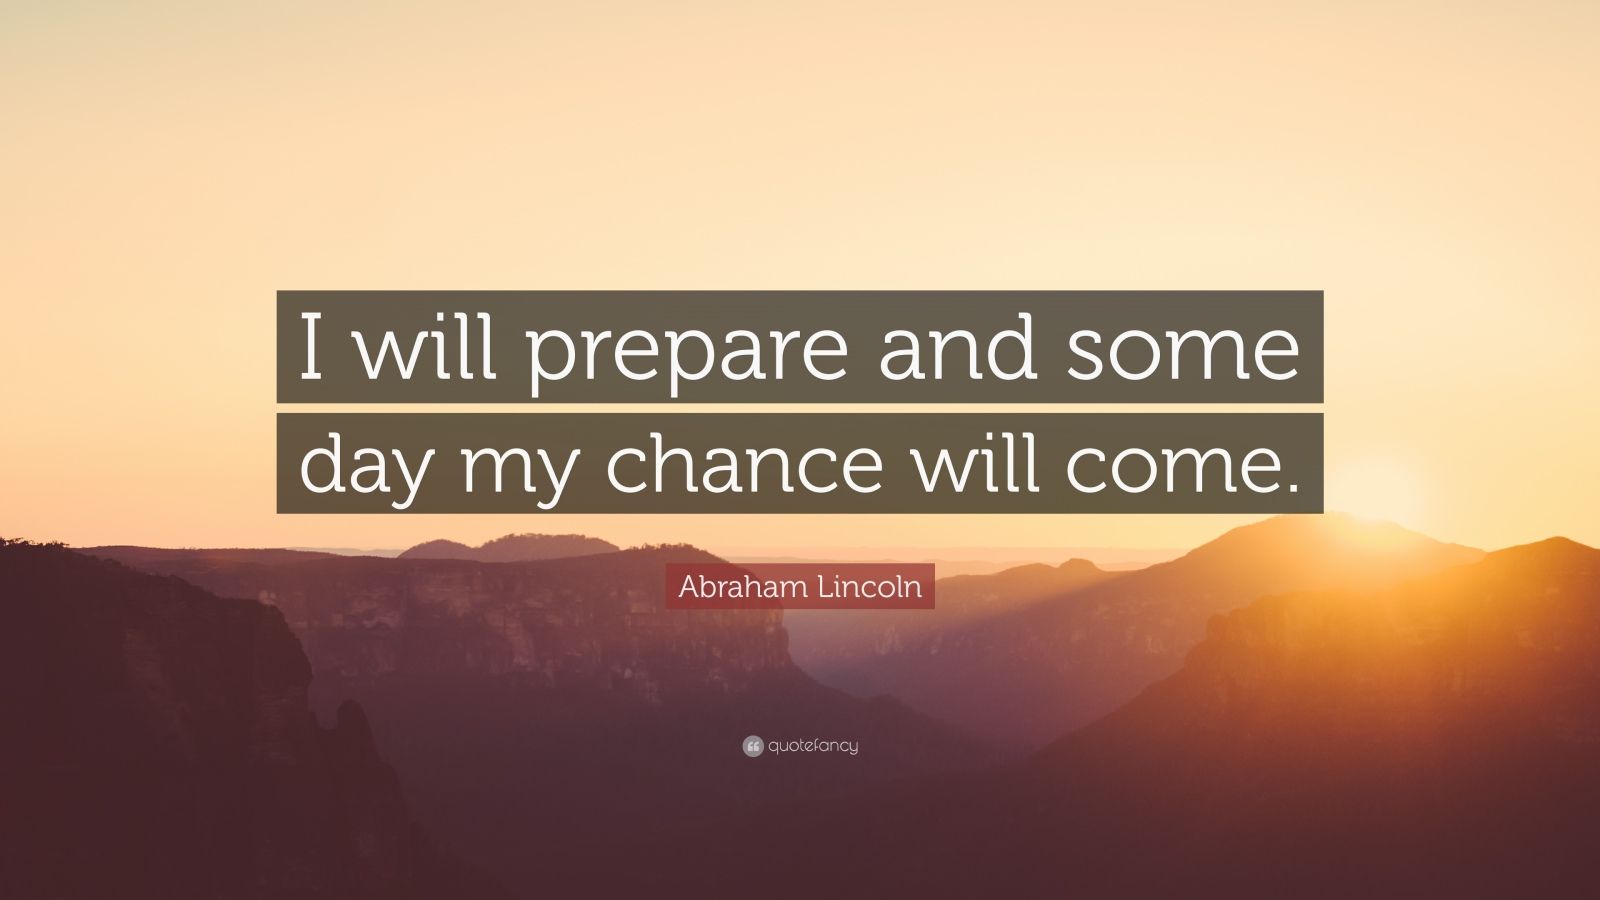 Abraham Lincoln Quote: “I will prepare and some day my chance will come.” (24 ...1600 x 900